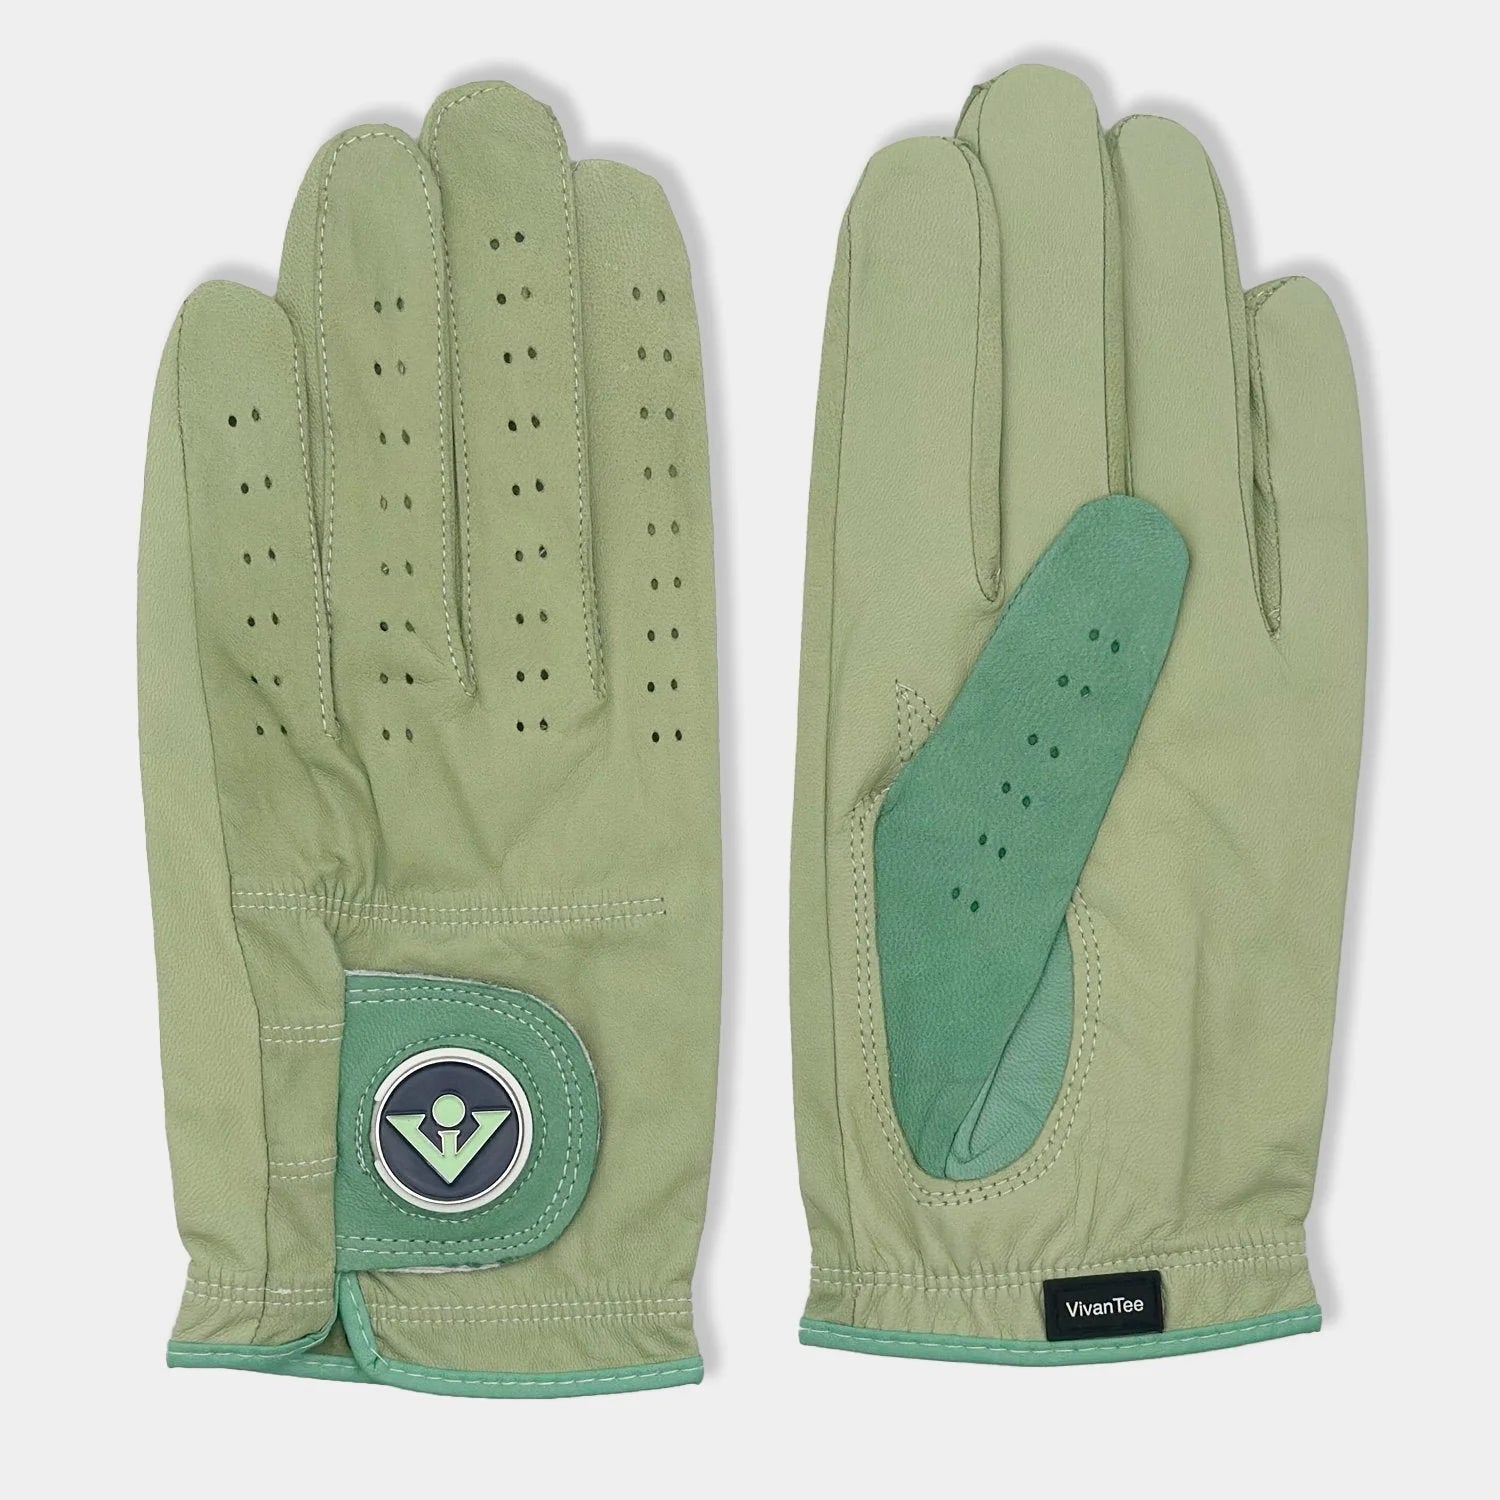 Seafoam Green designer golf glove with two levels of green on thumb and patch, in a black background to show the unique qualities and vibrant colors.